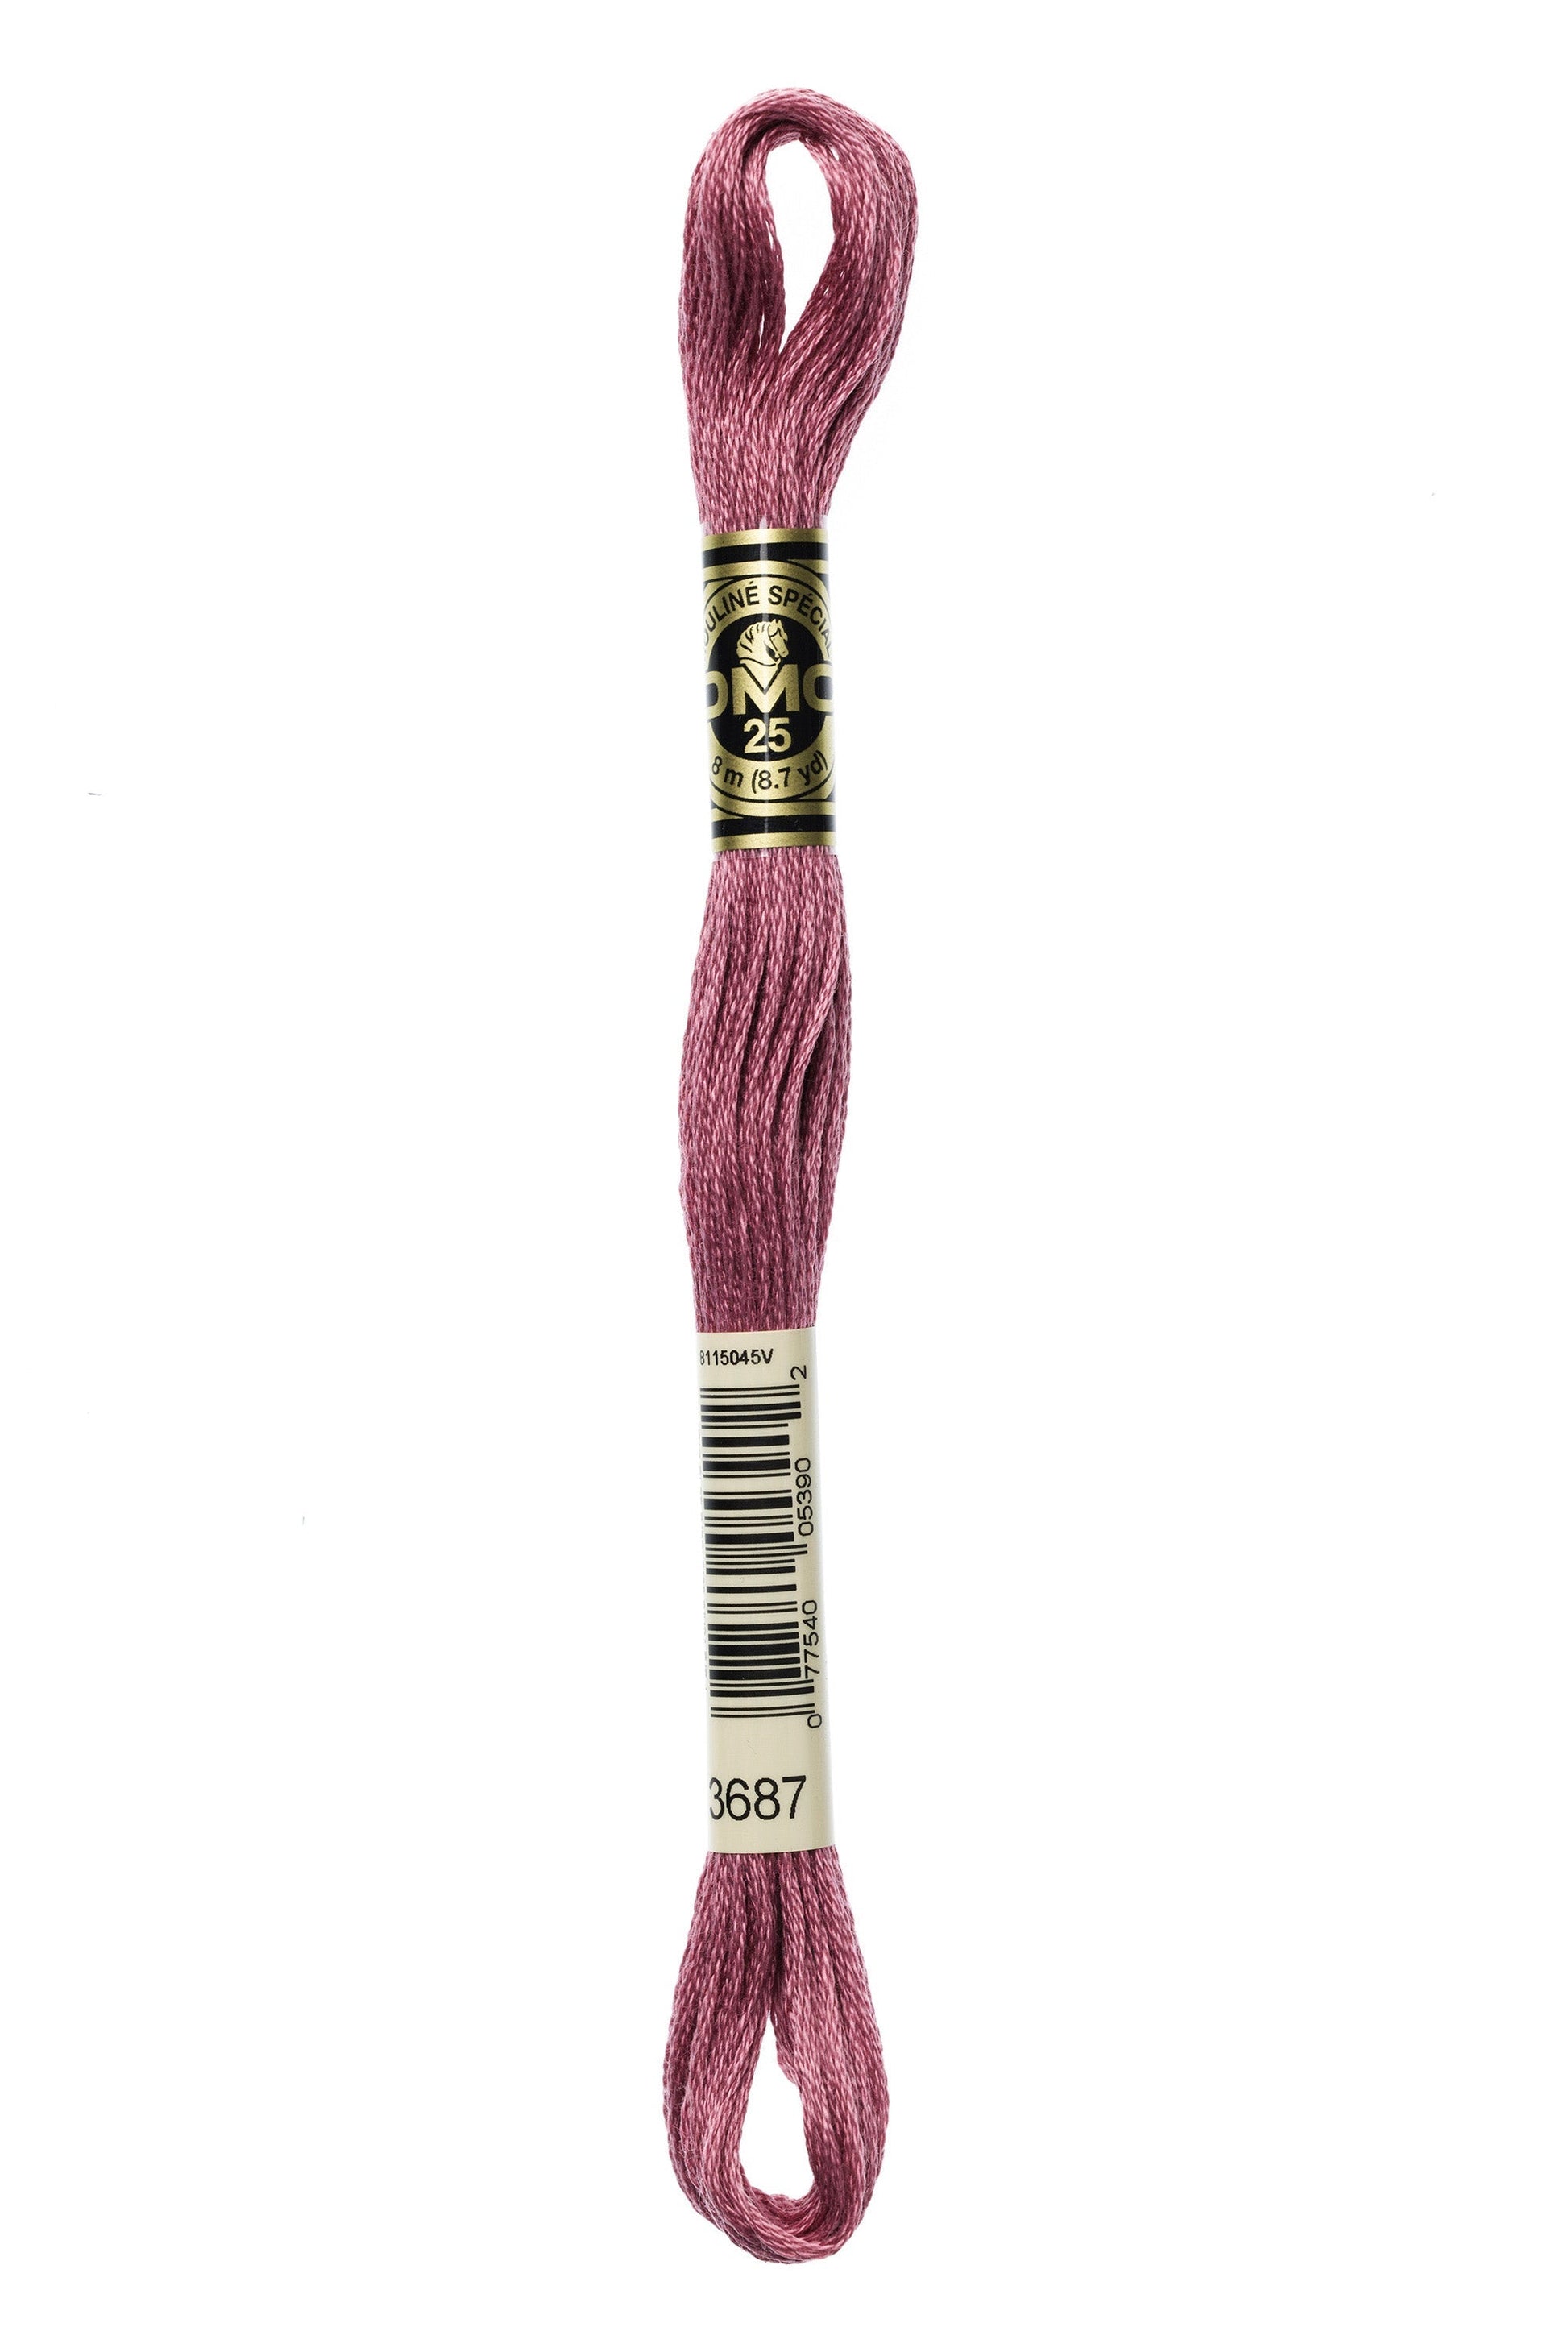 Six-Strand Embroidery Floss - 3687 (Berry Smoothie)-Embroidery Thread-Wild and Woolly Yarns